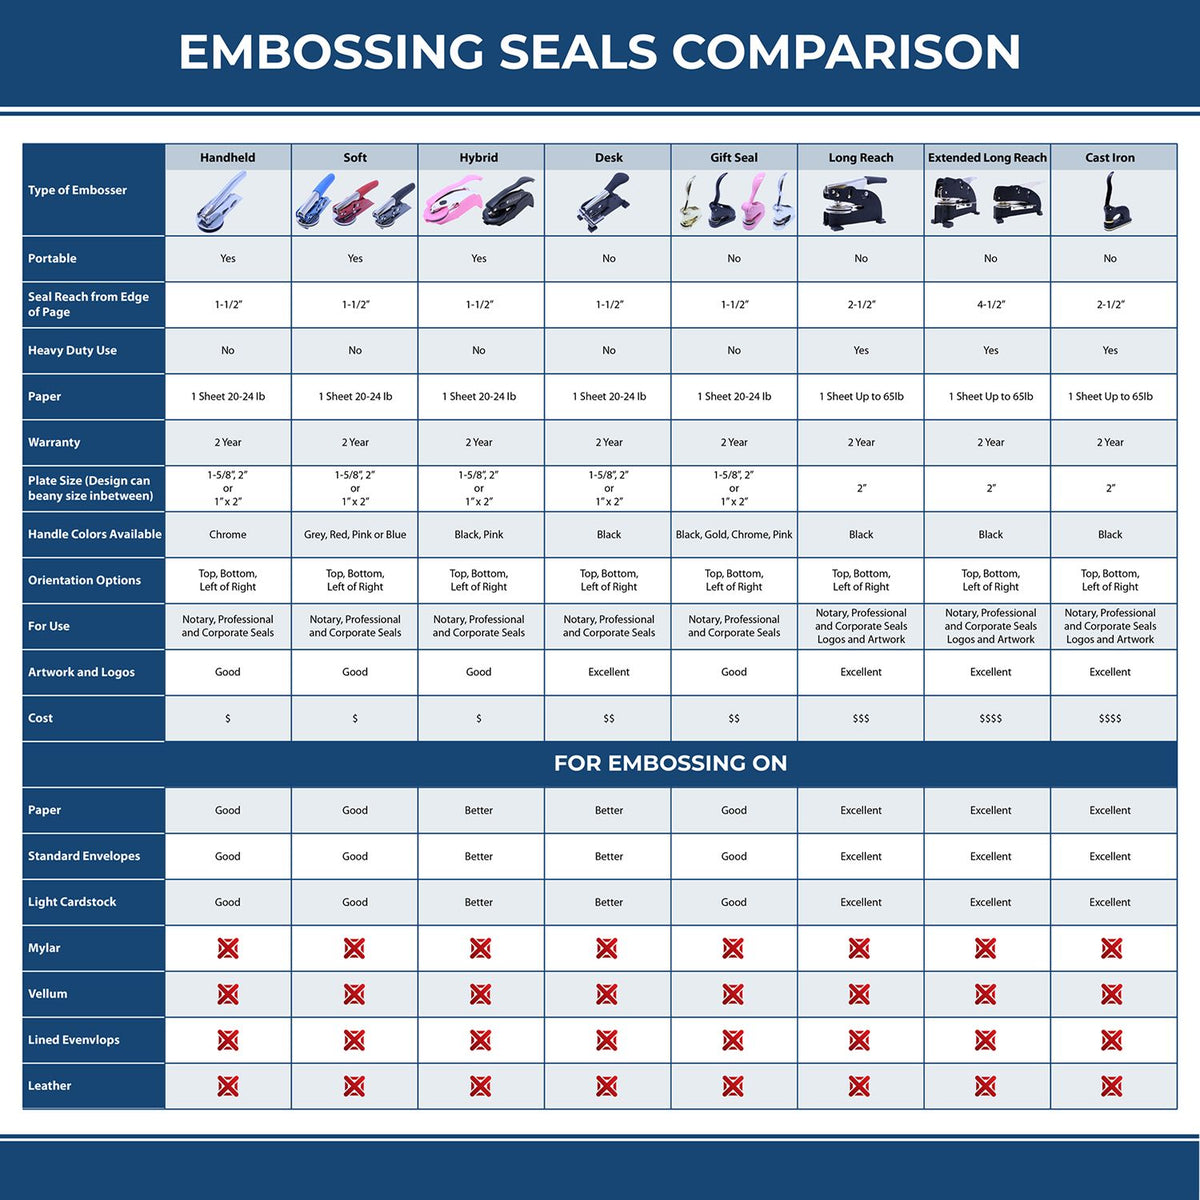 A comparison chart for the different types of mount models available for the Extended Long Reach Michigan Architect Seal Embosser.